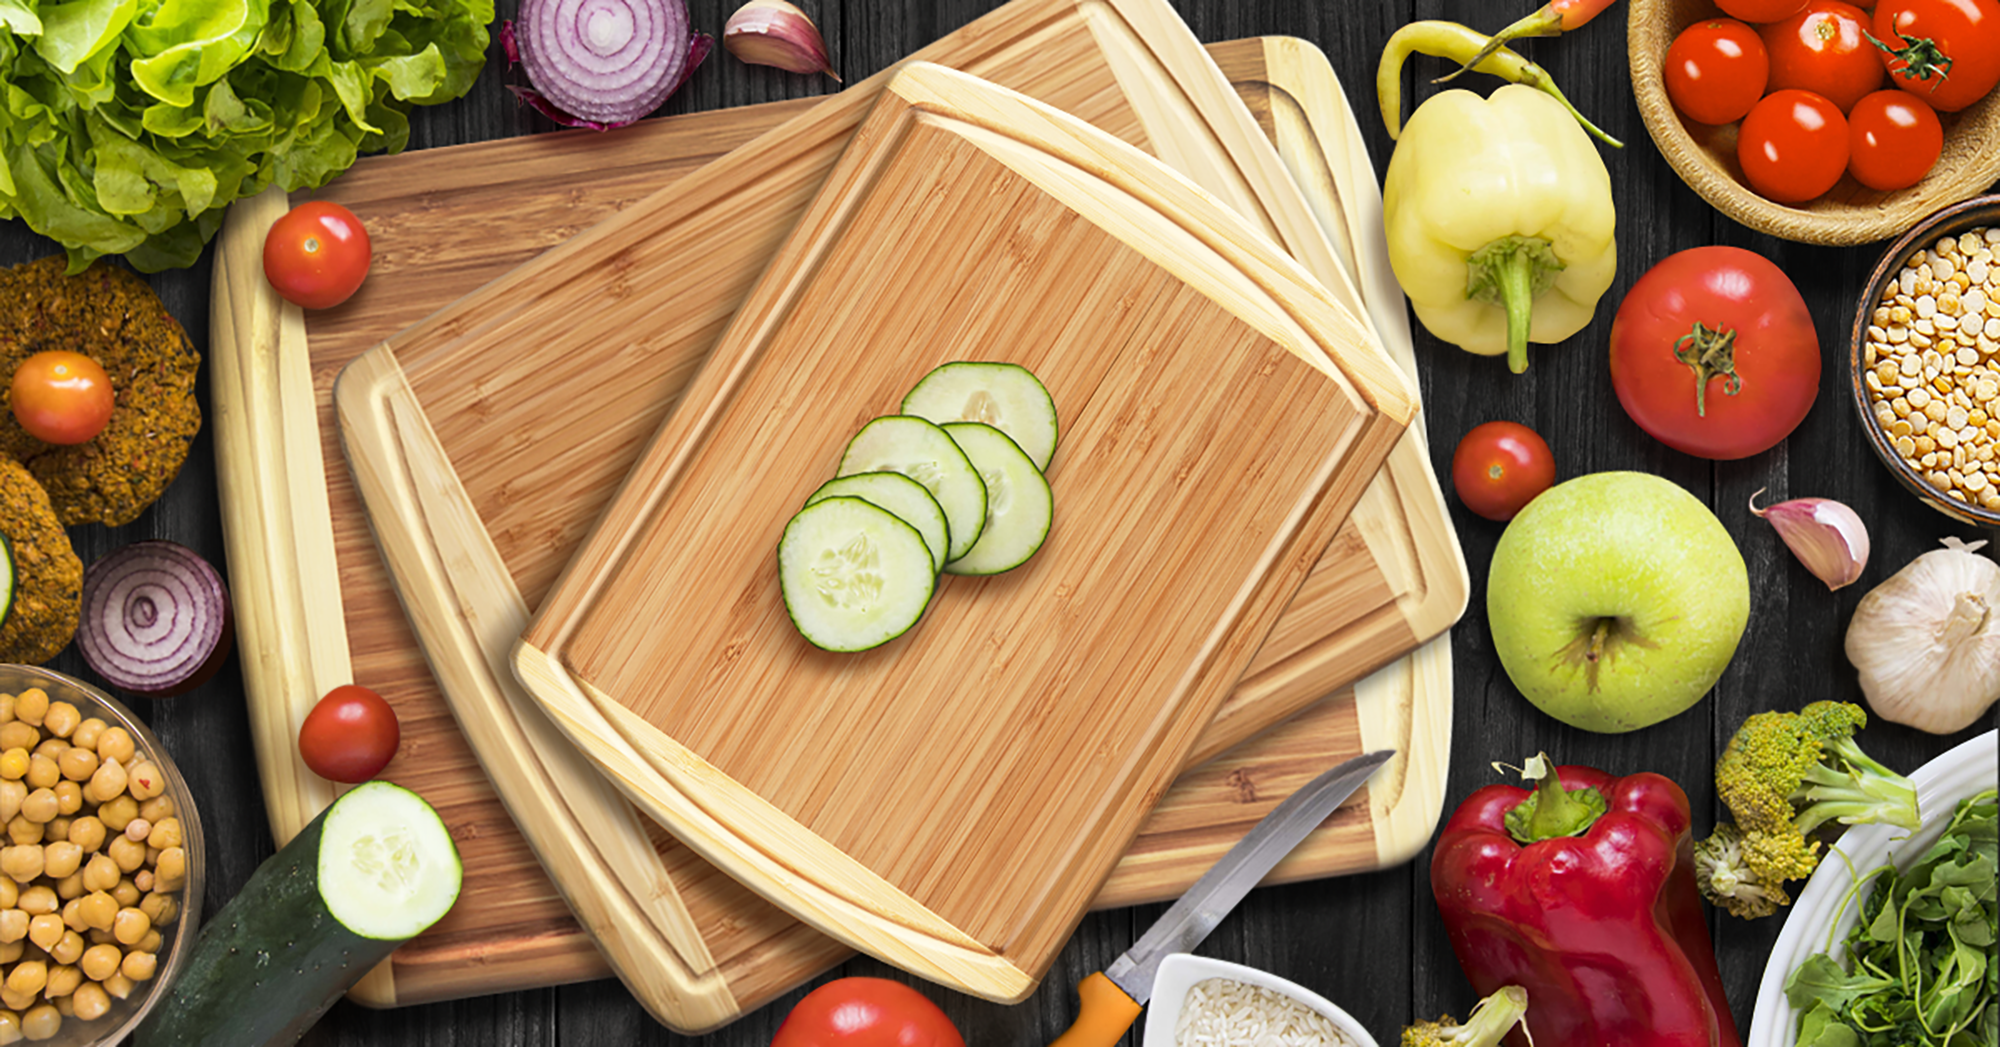 GREENER CHEF 15 Inch Medium Cutting Board with Lifetime Replacements,  Bamboo Cutting Boards for Kitchen, Butcher Block, Medium Wooden Chopping  Board